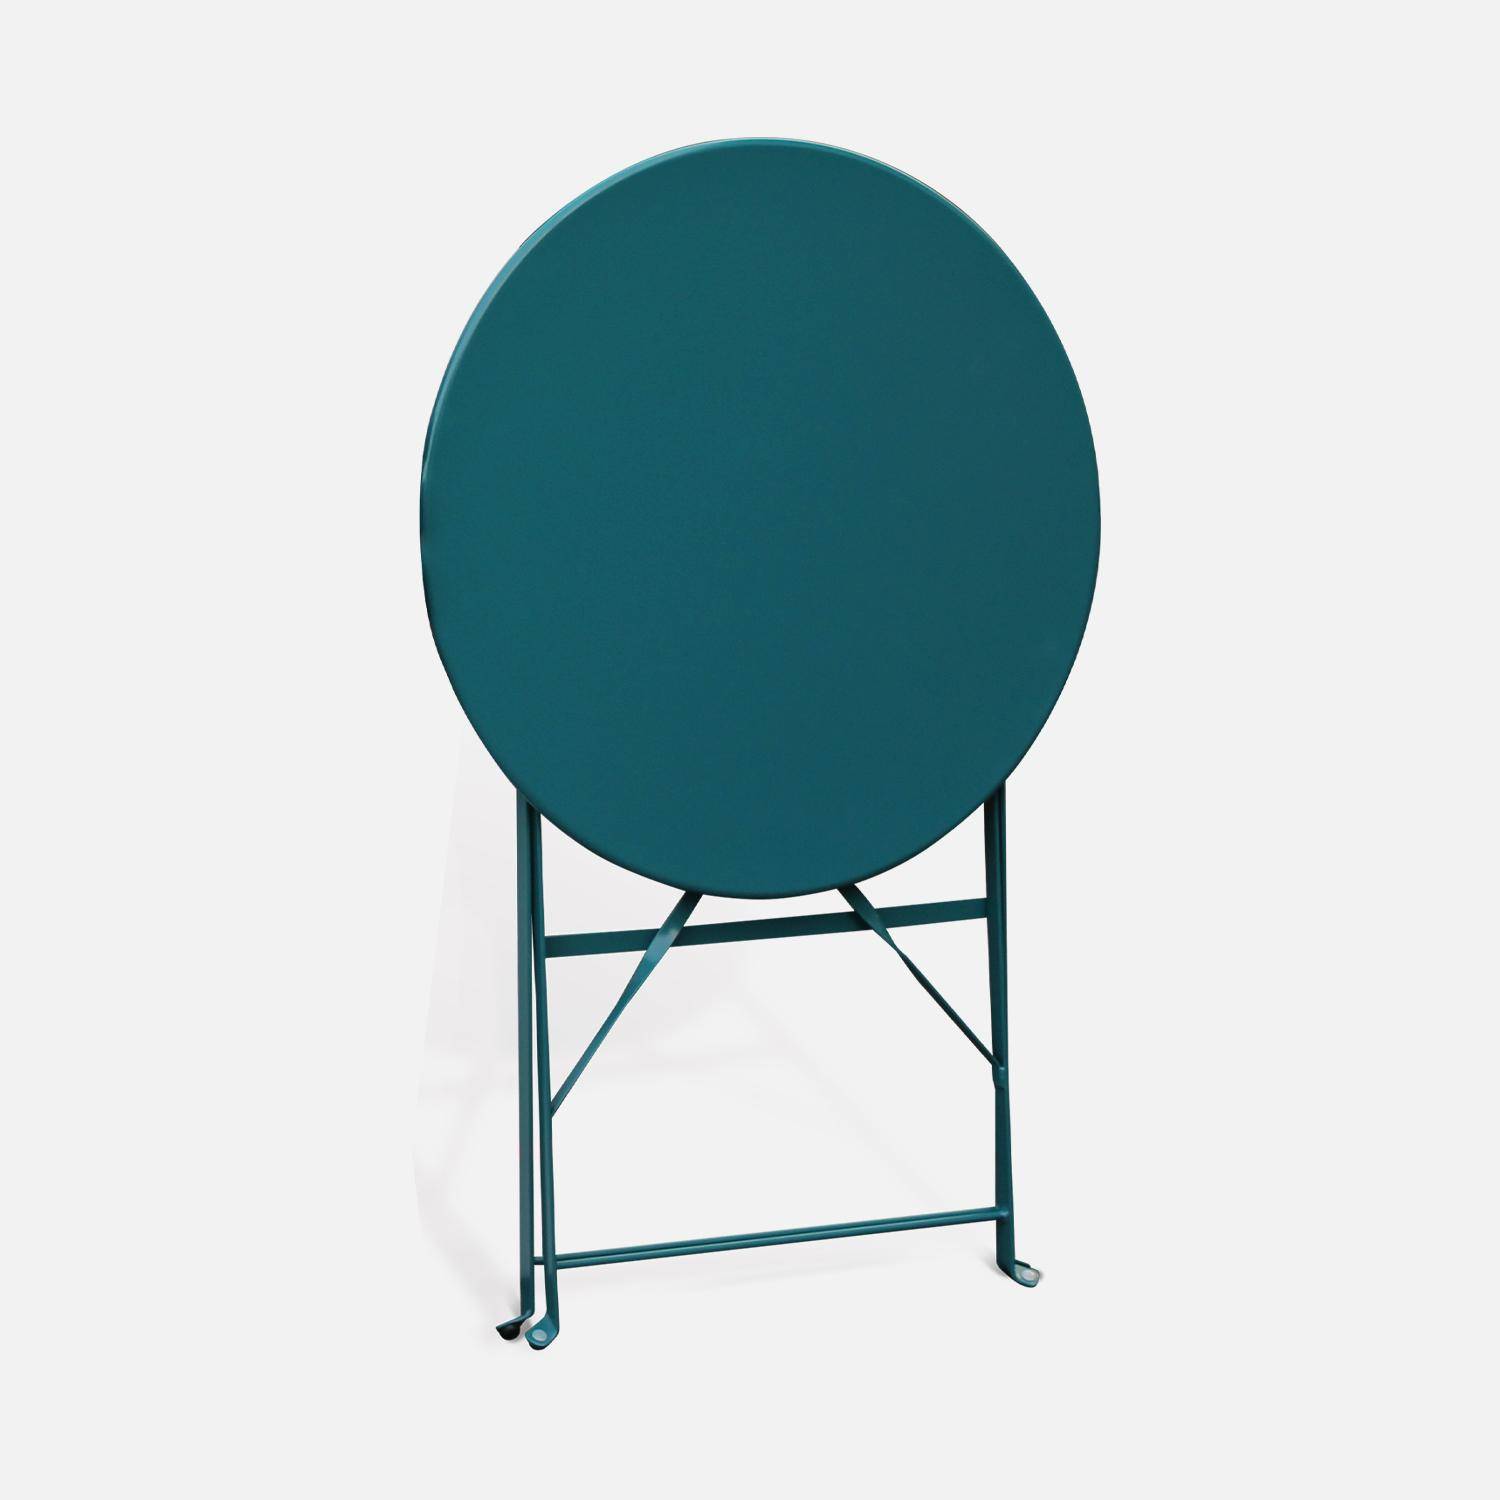 Foldable bistro garden table - Round Emilia duck blue - Round table Ø60cm, thermo-lacquered steel Photo4